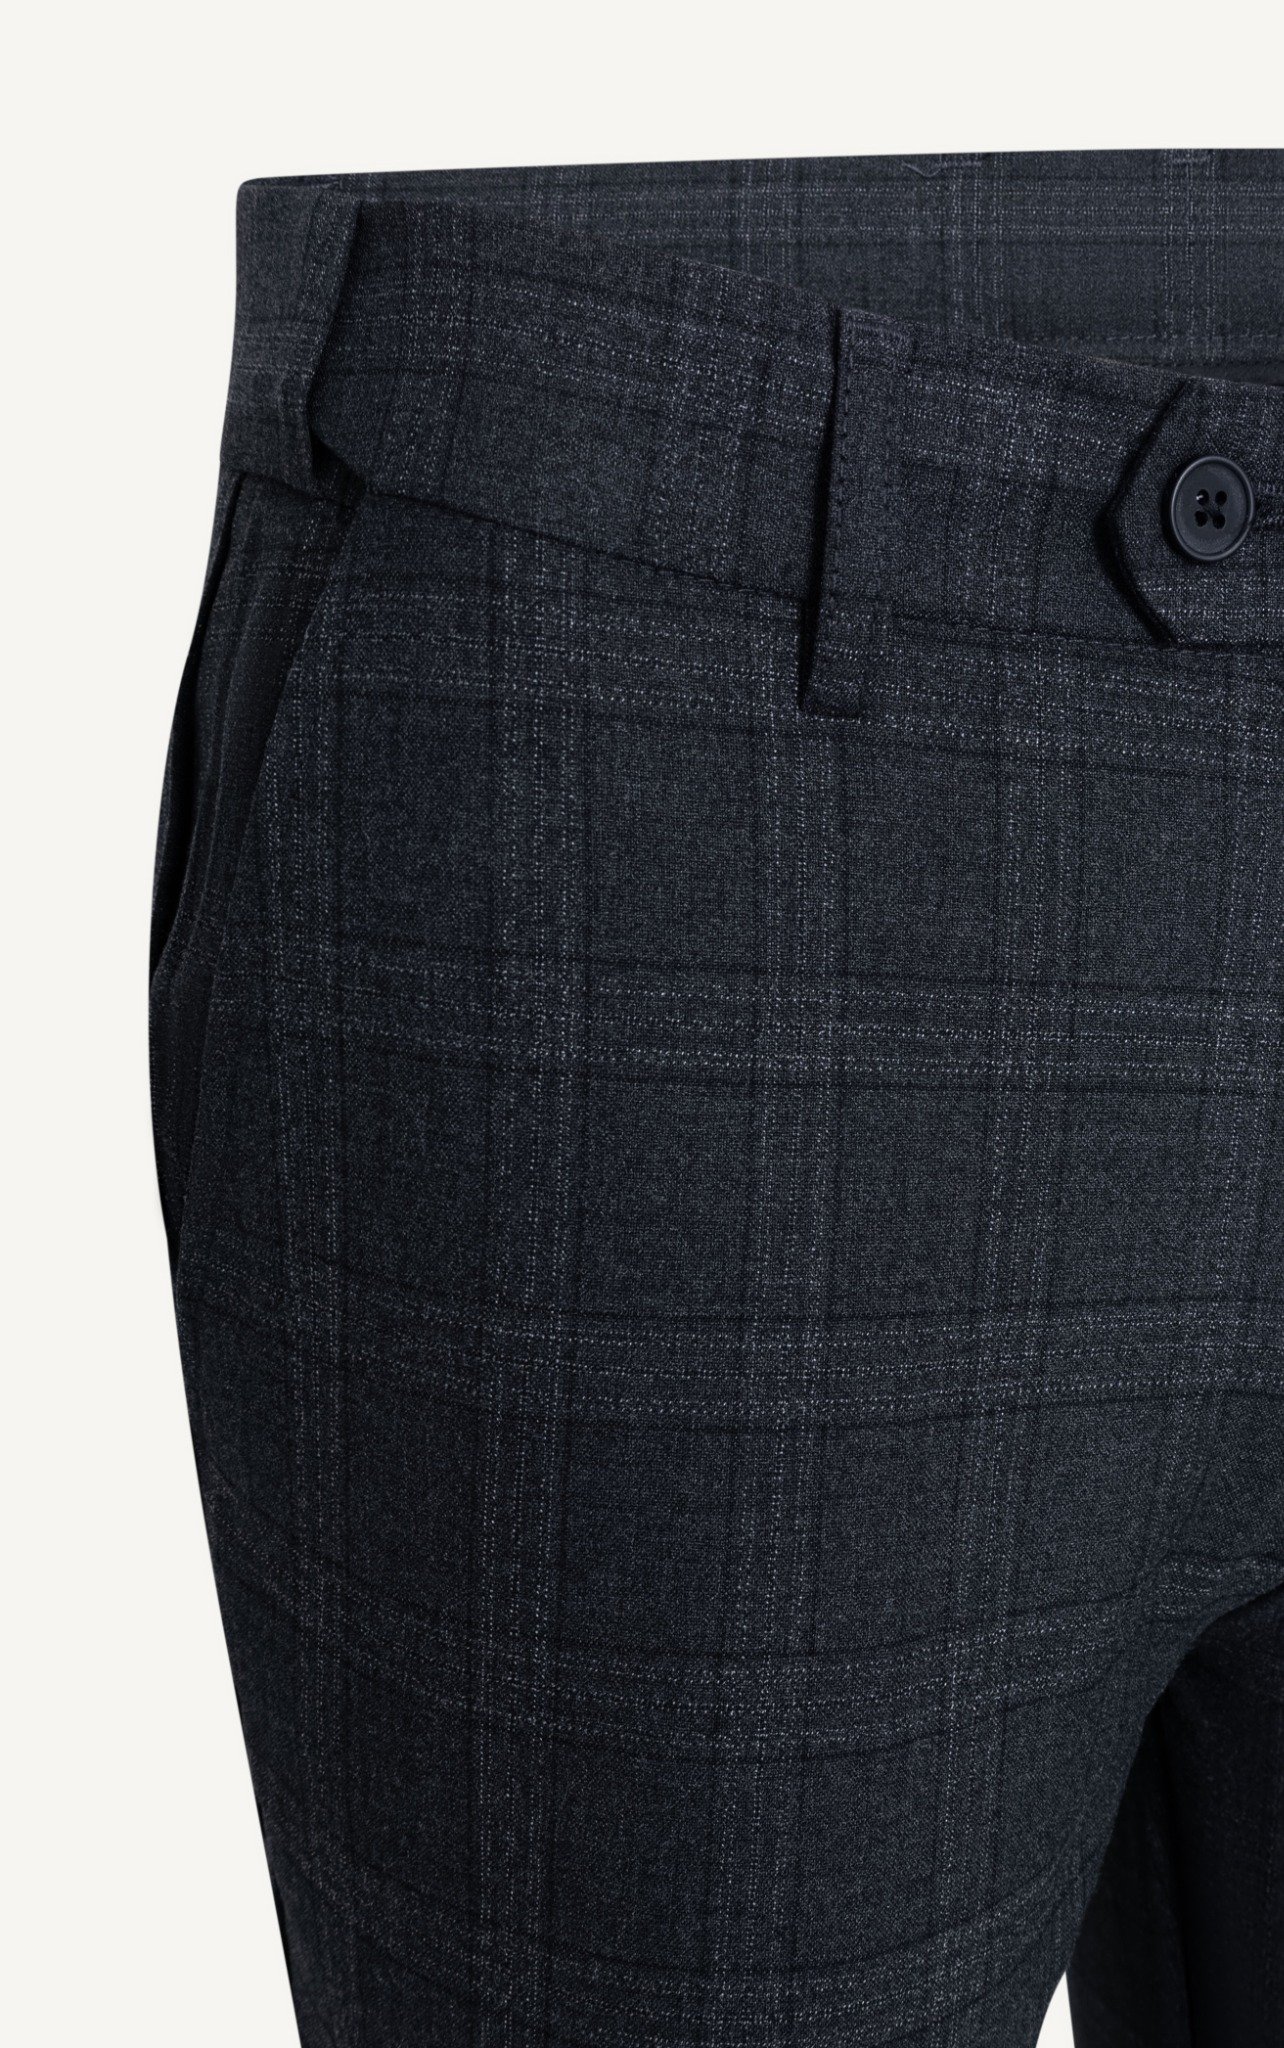 AG505 PREMIUM SLIMFIT CHECKED TROUSERS - GREY